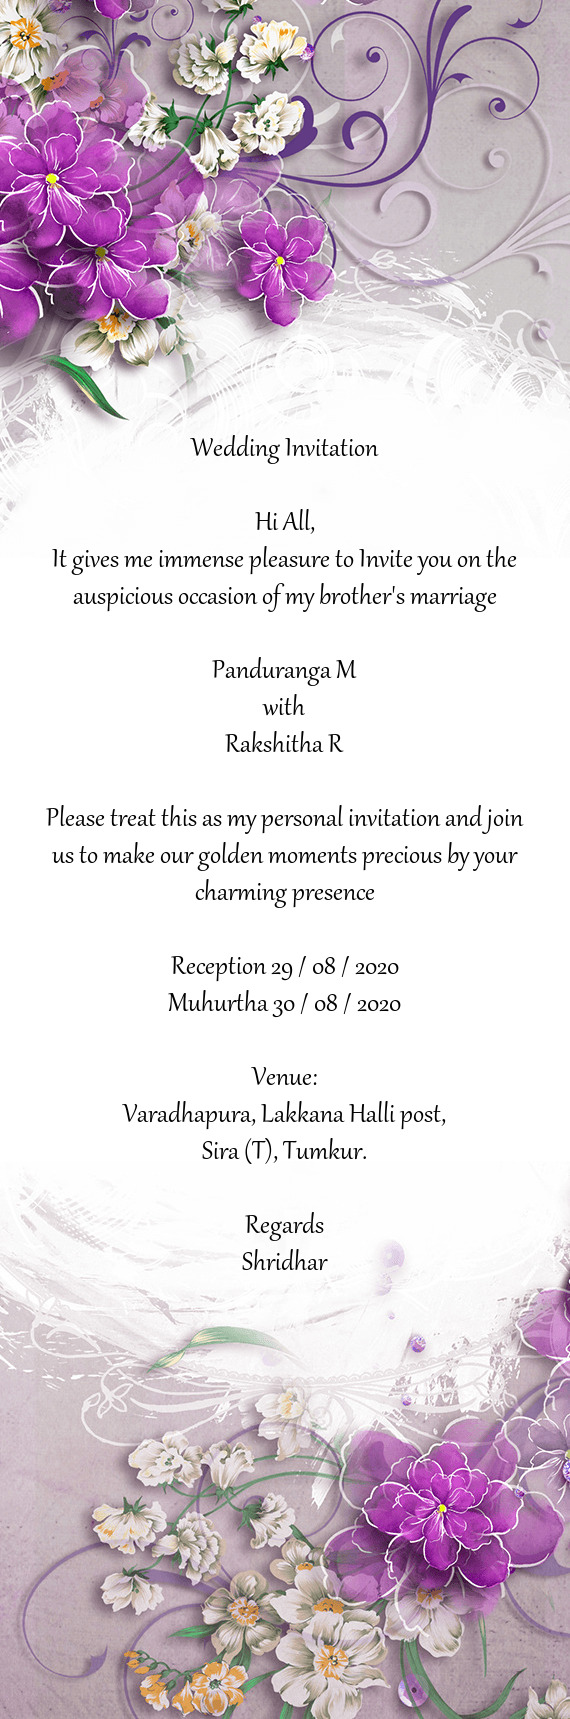 It gives me immense pleasure to Invite you on the auspicious occasion of my brother